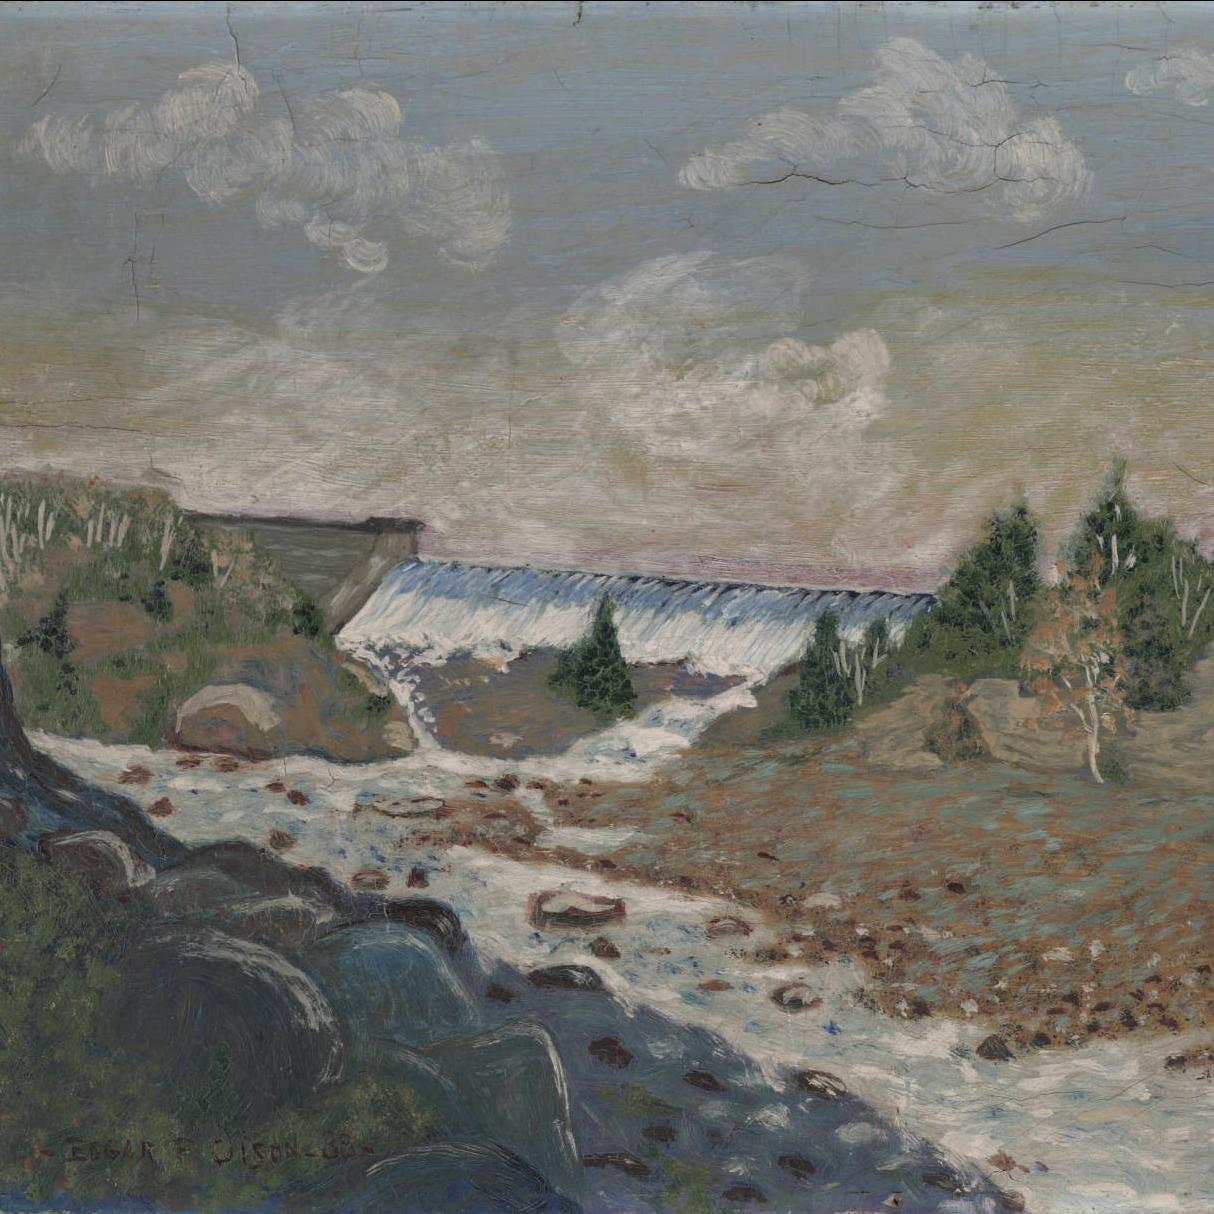 Oil painting of a dam across a river